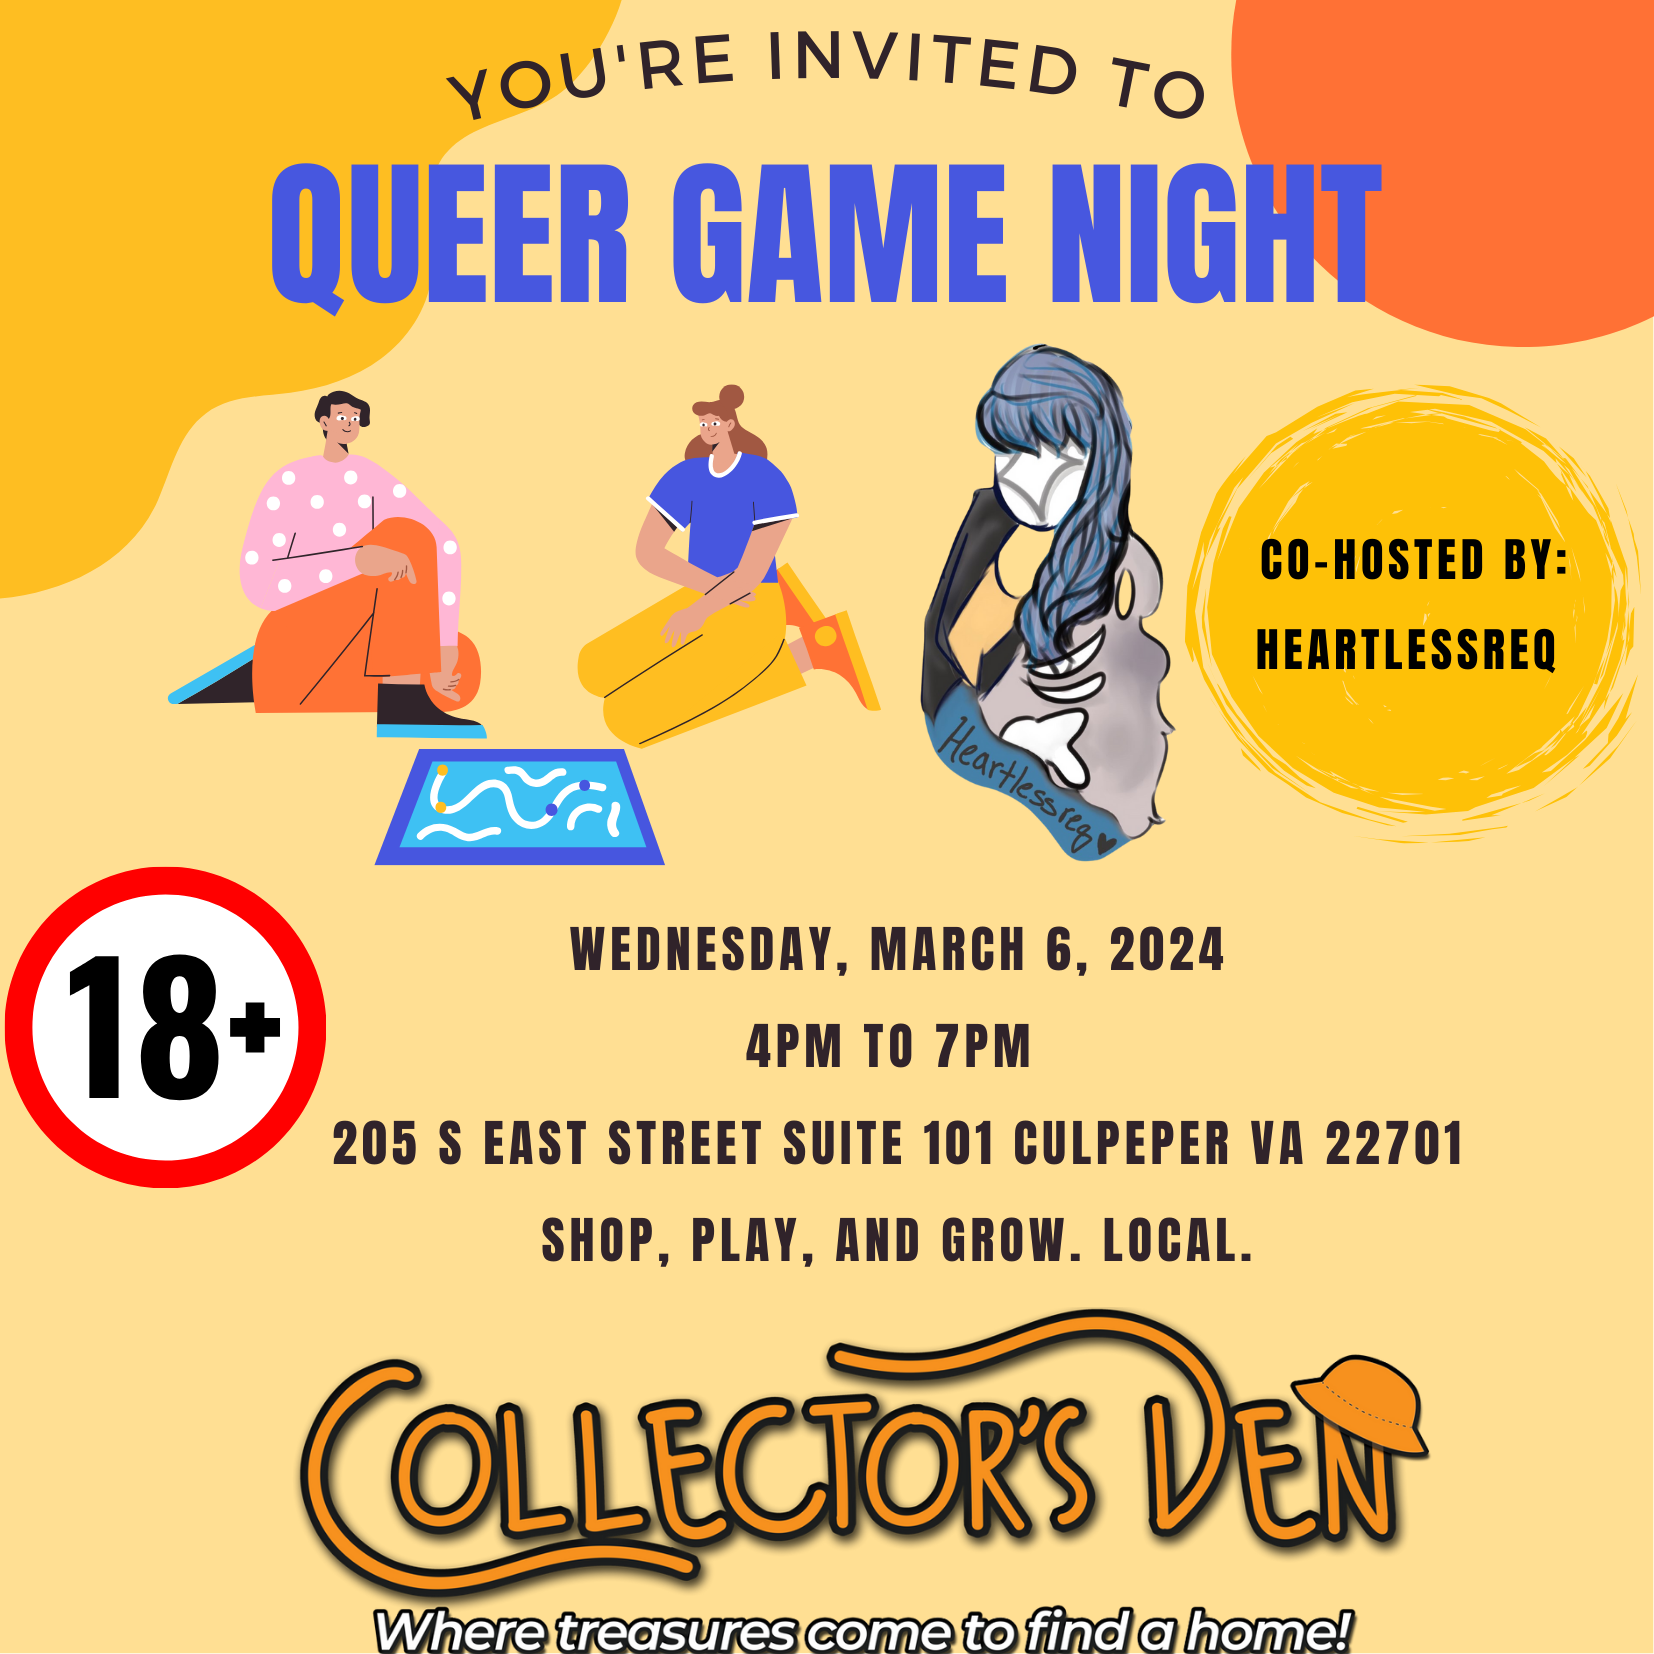 Queer Game Night Image